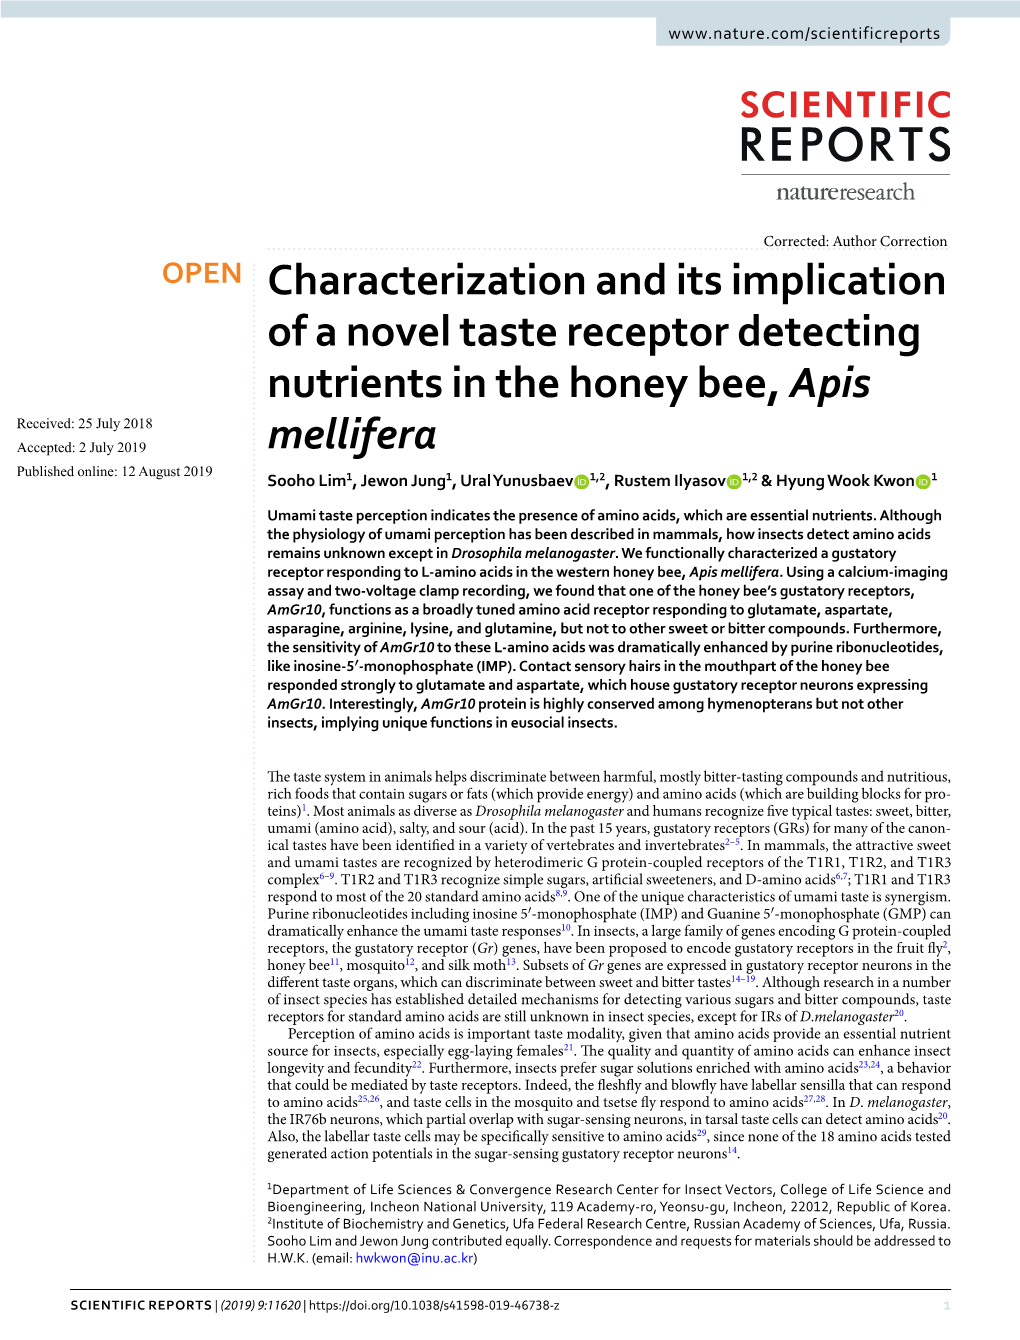 Characterization and Its Implication of a Novel Taste Receptor Detecting